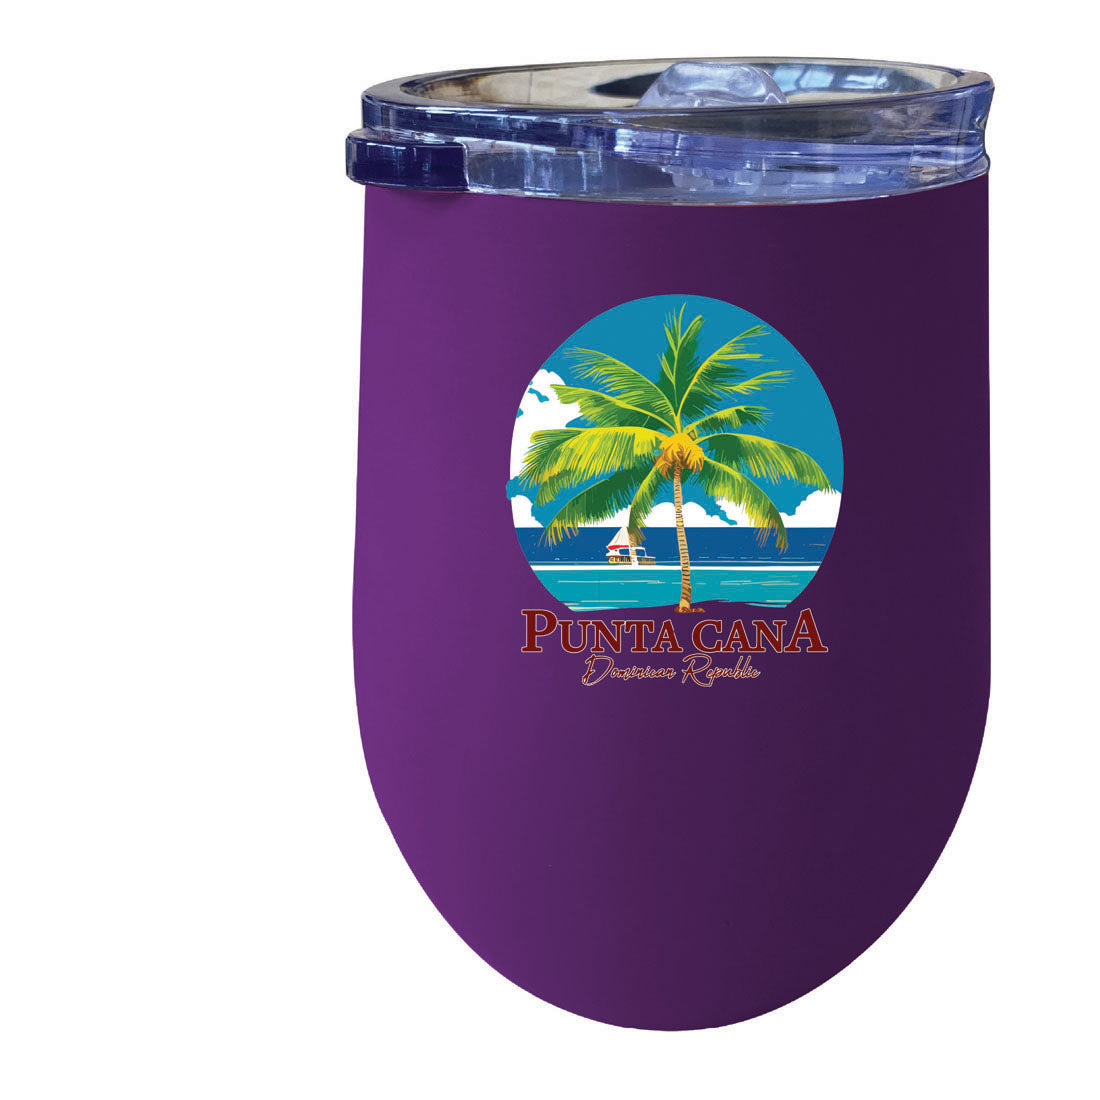 Punta Cana Dominican Republic Souvenir 12 Oz Insulated Wine Stainless Steel Tumbler - Navy, PALM